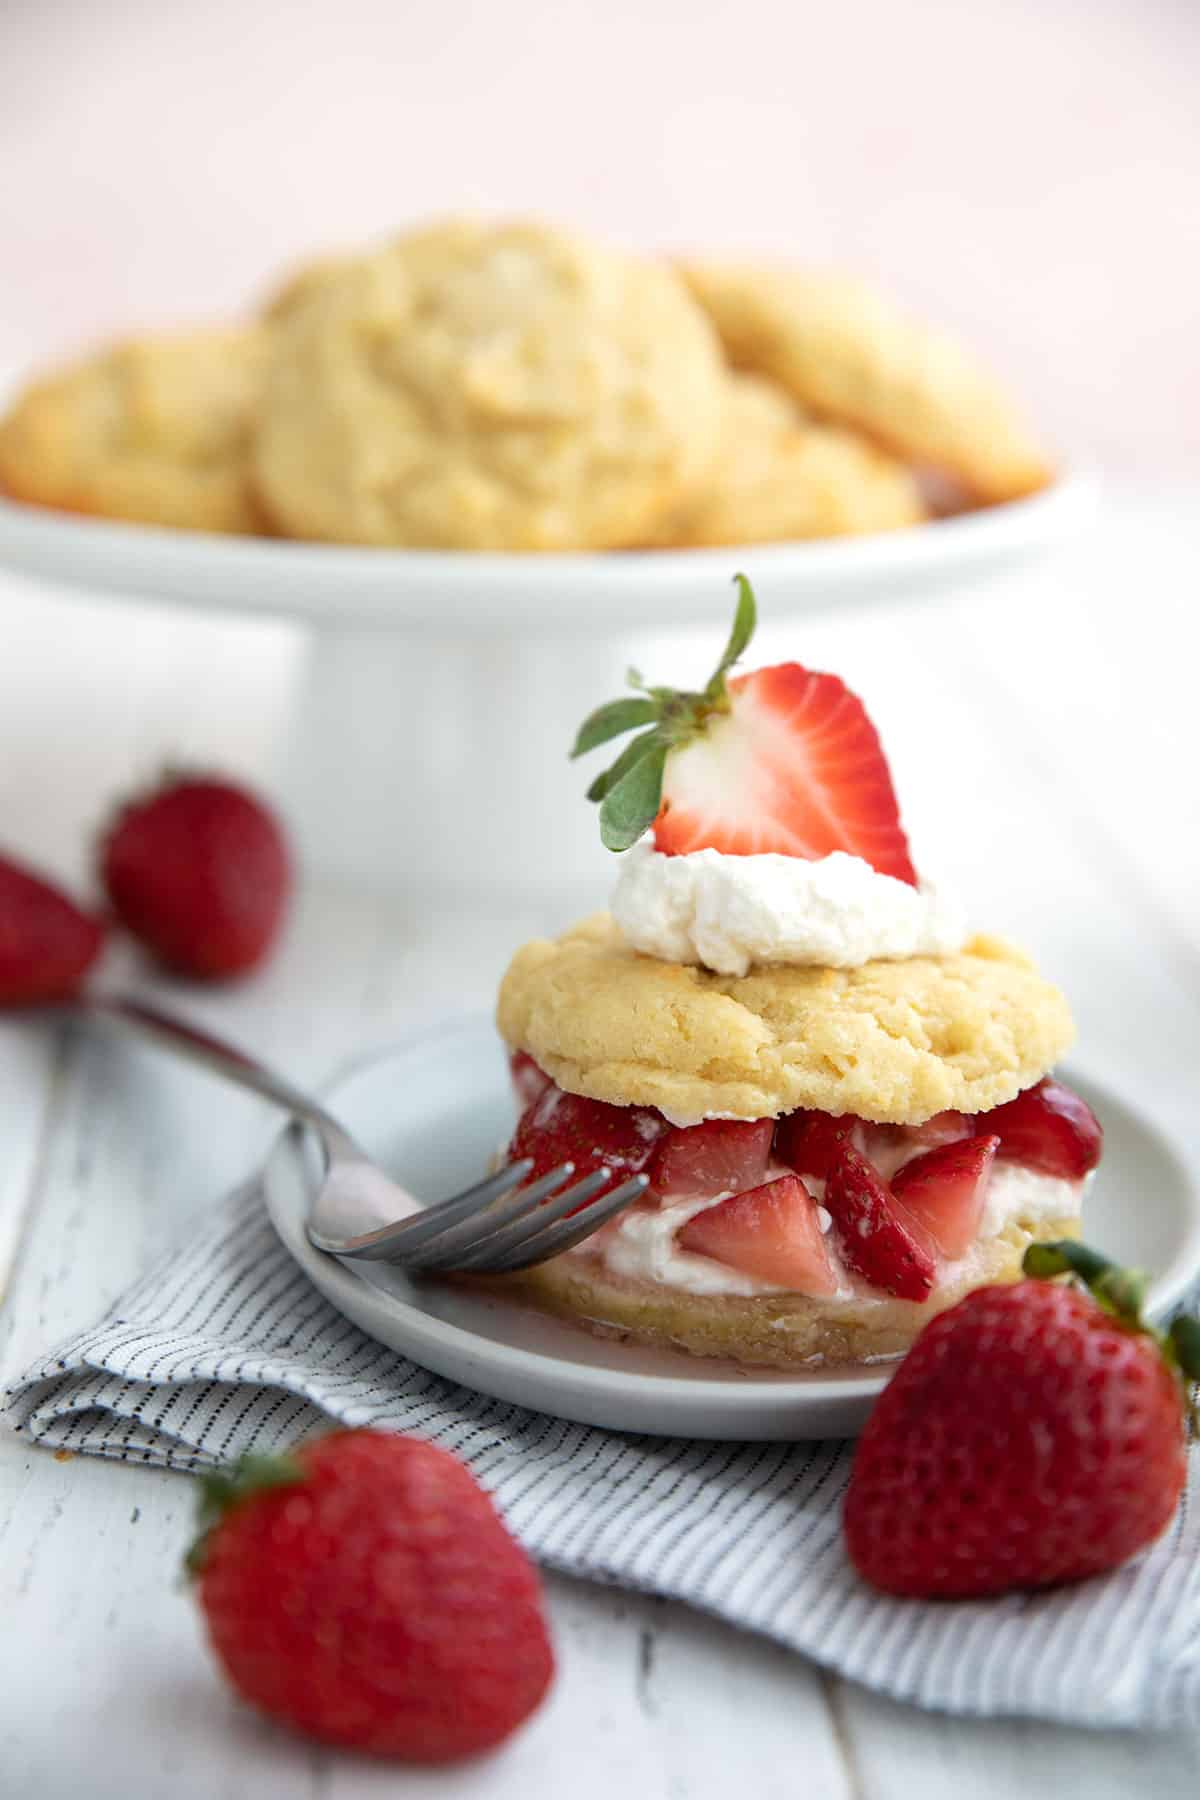 Keto Strawberry Shortcake on a gray plate in front of a stand of biscuits, with strawberries strewn around.